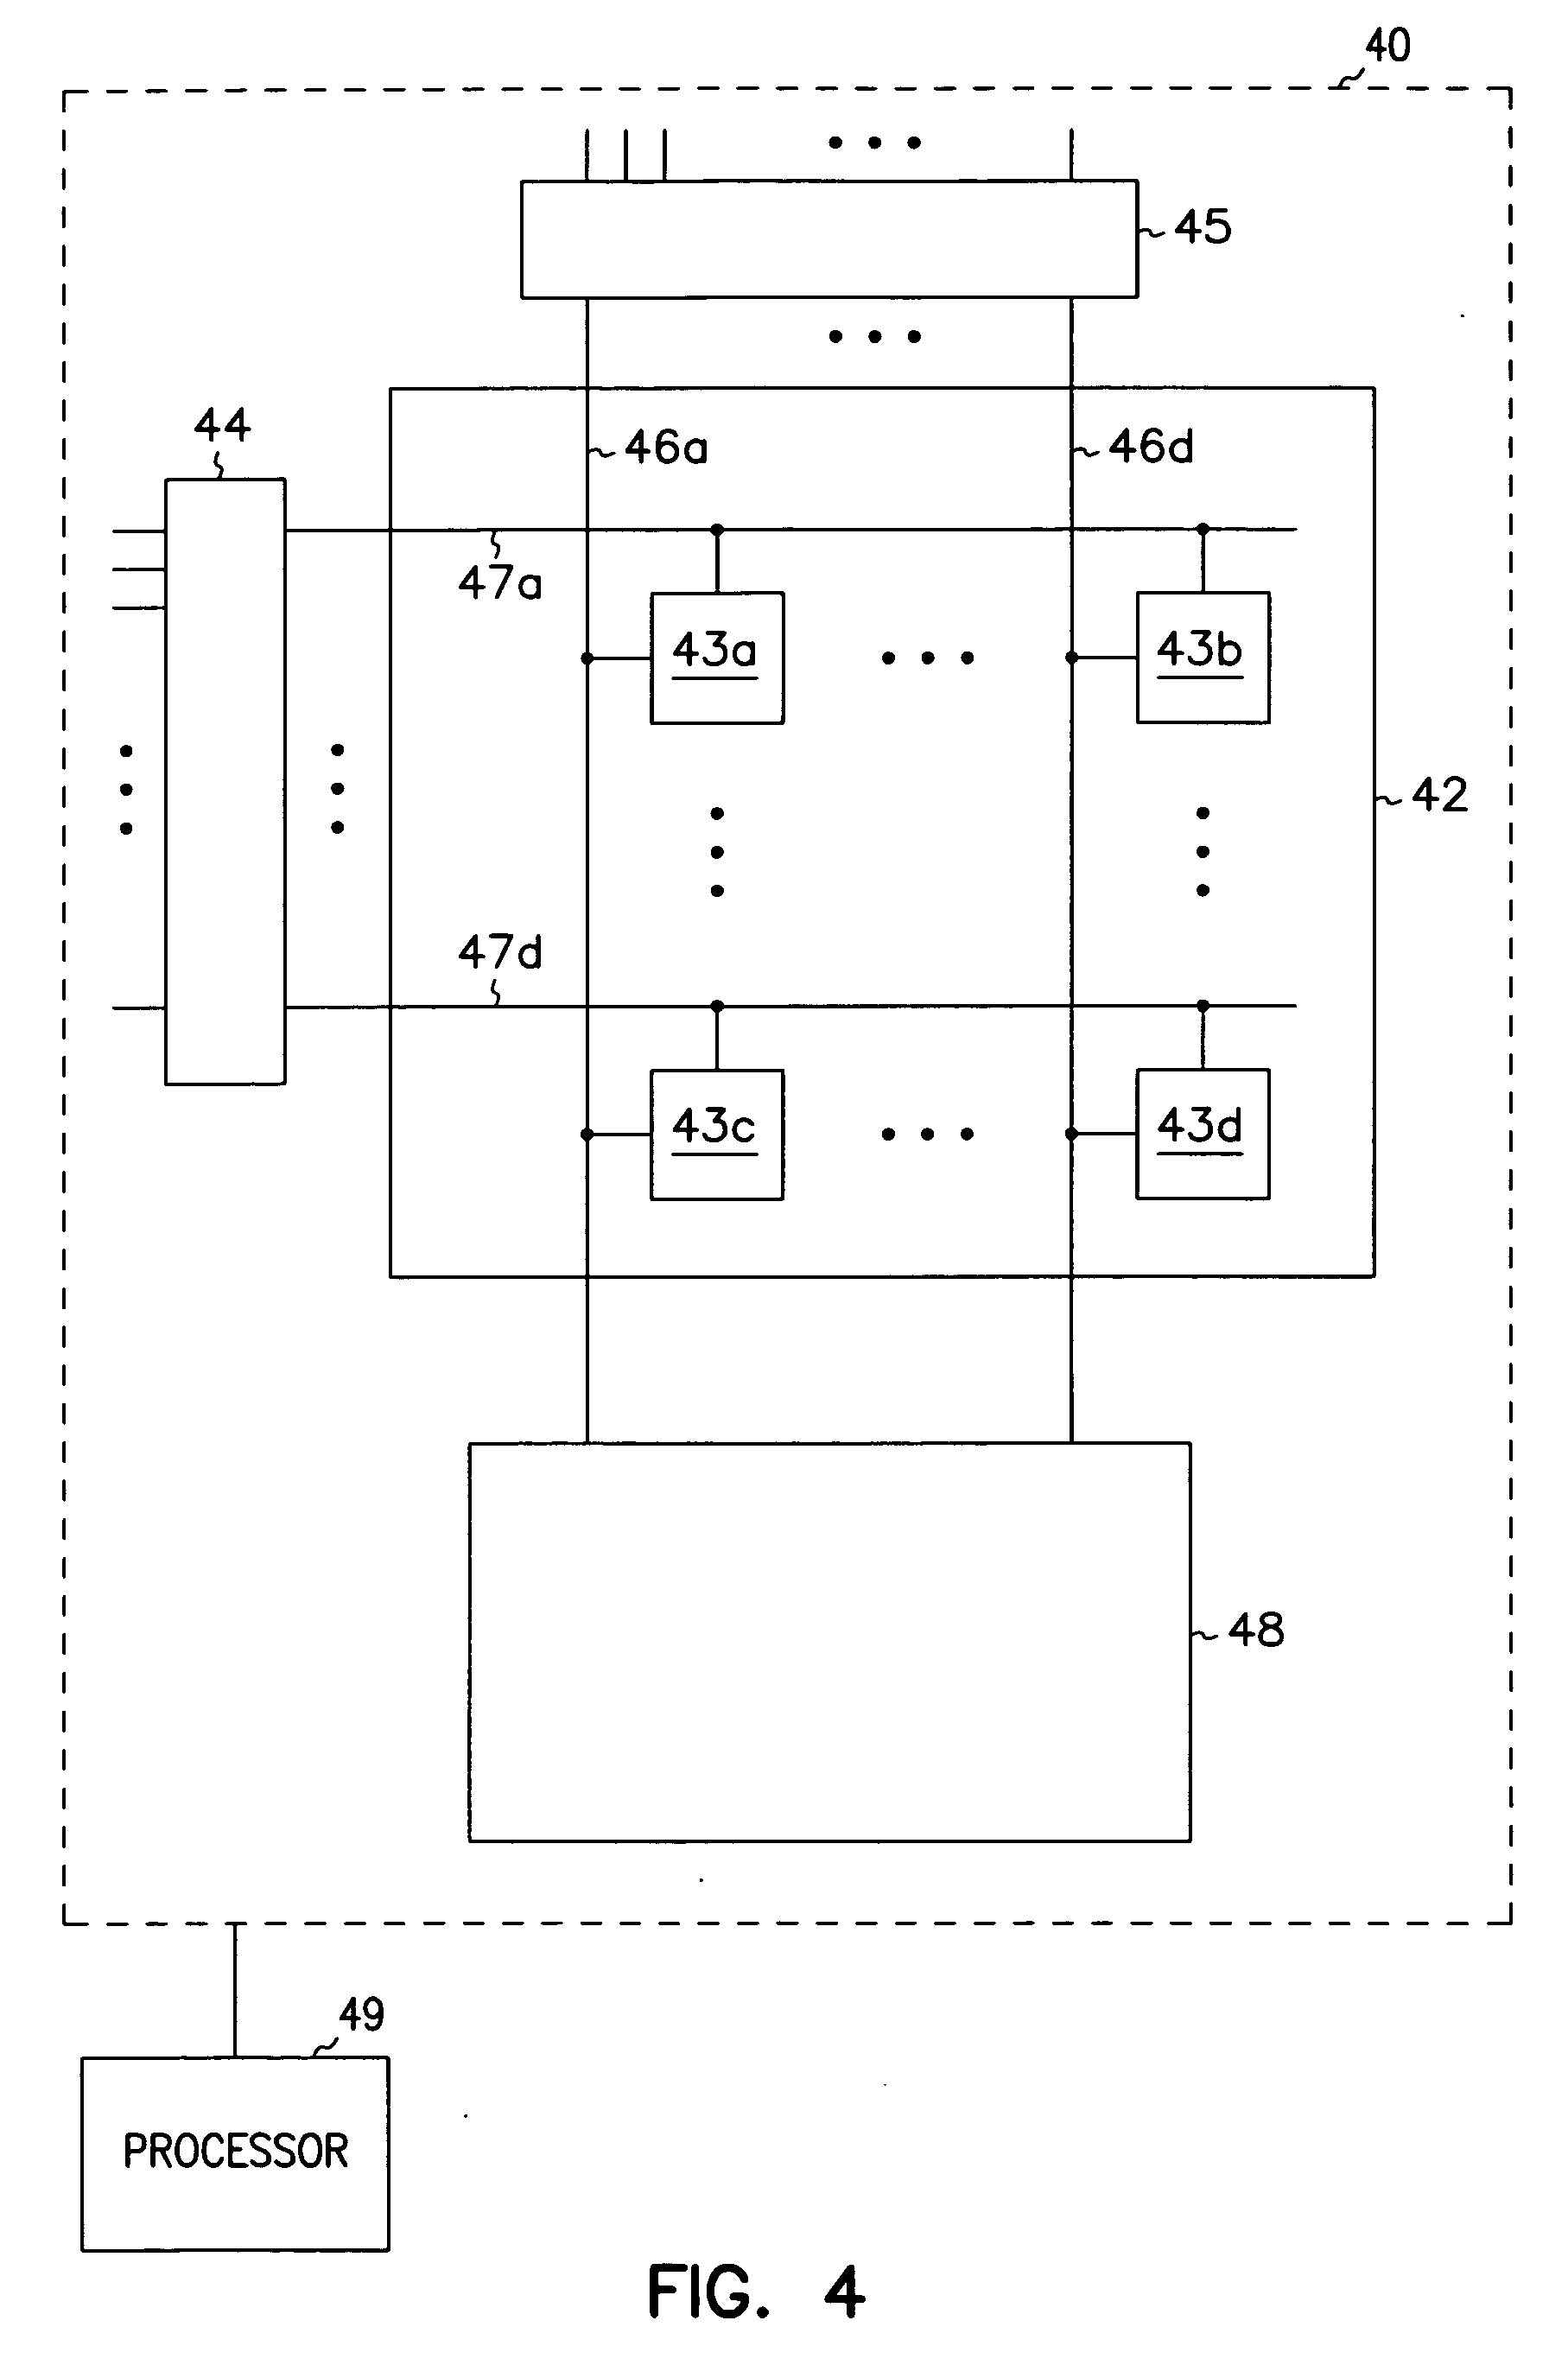 Structures, methods, and systems for ferroelectric memory transistors